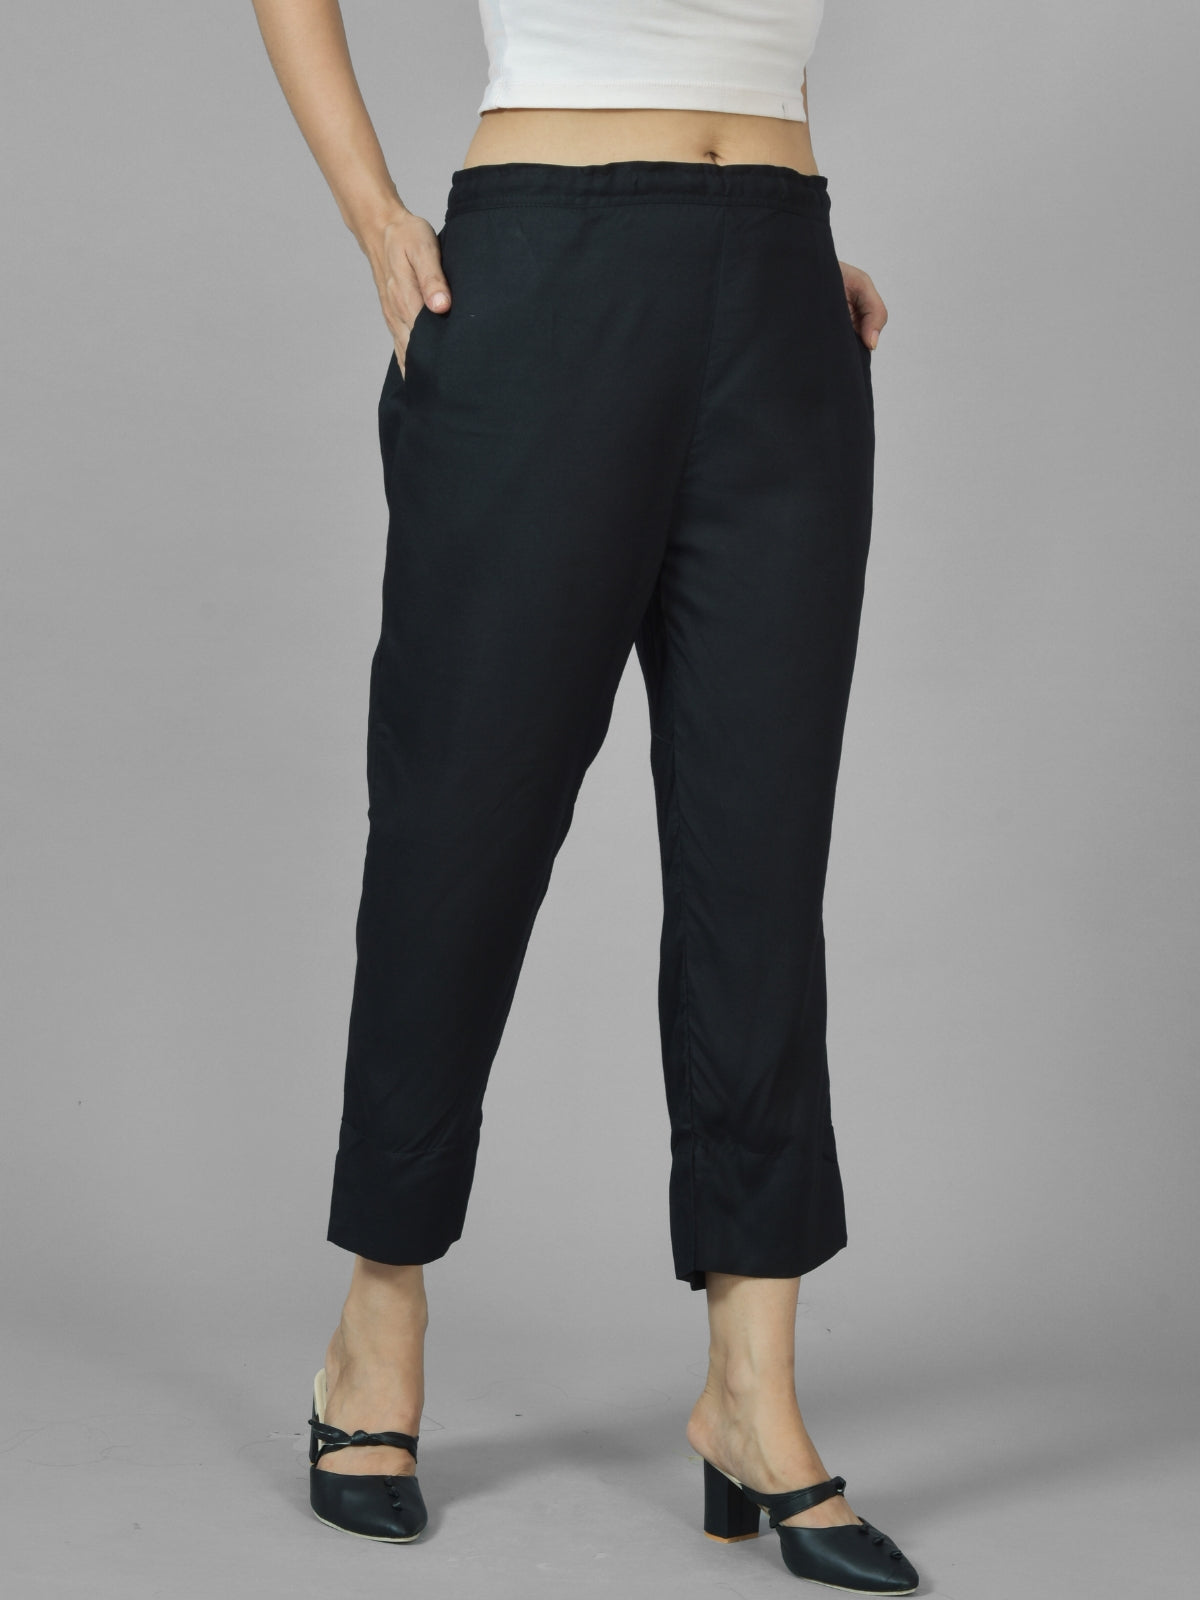 Women Solid Black Rayon Culottes Trouser